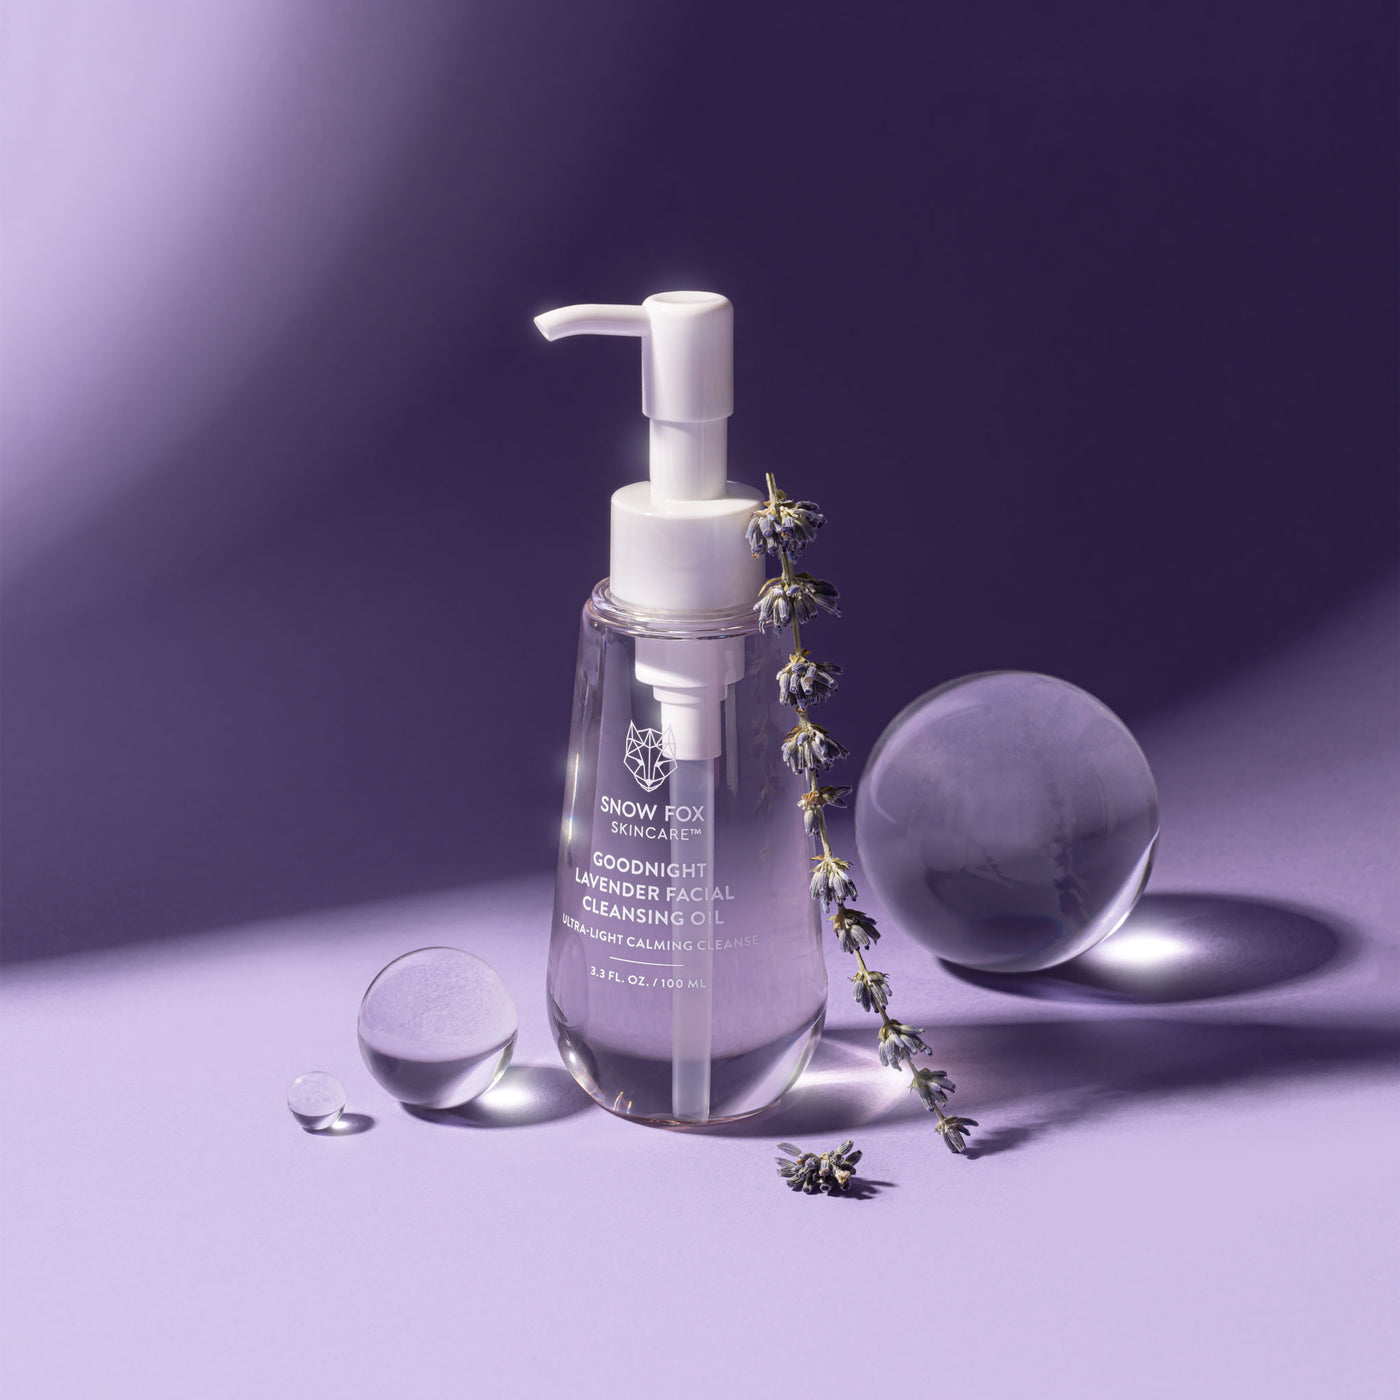 Goodnight Lavender Facial Cleansing Oil